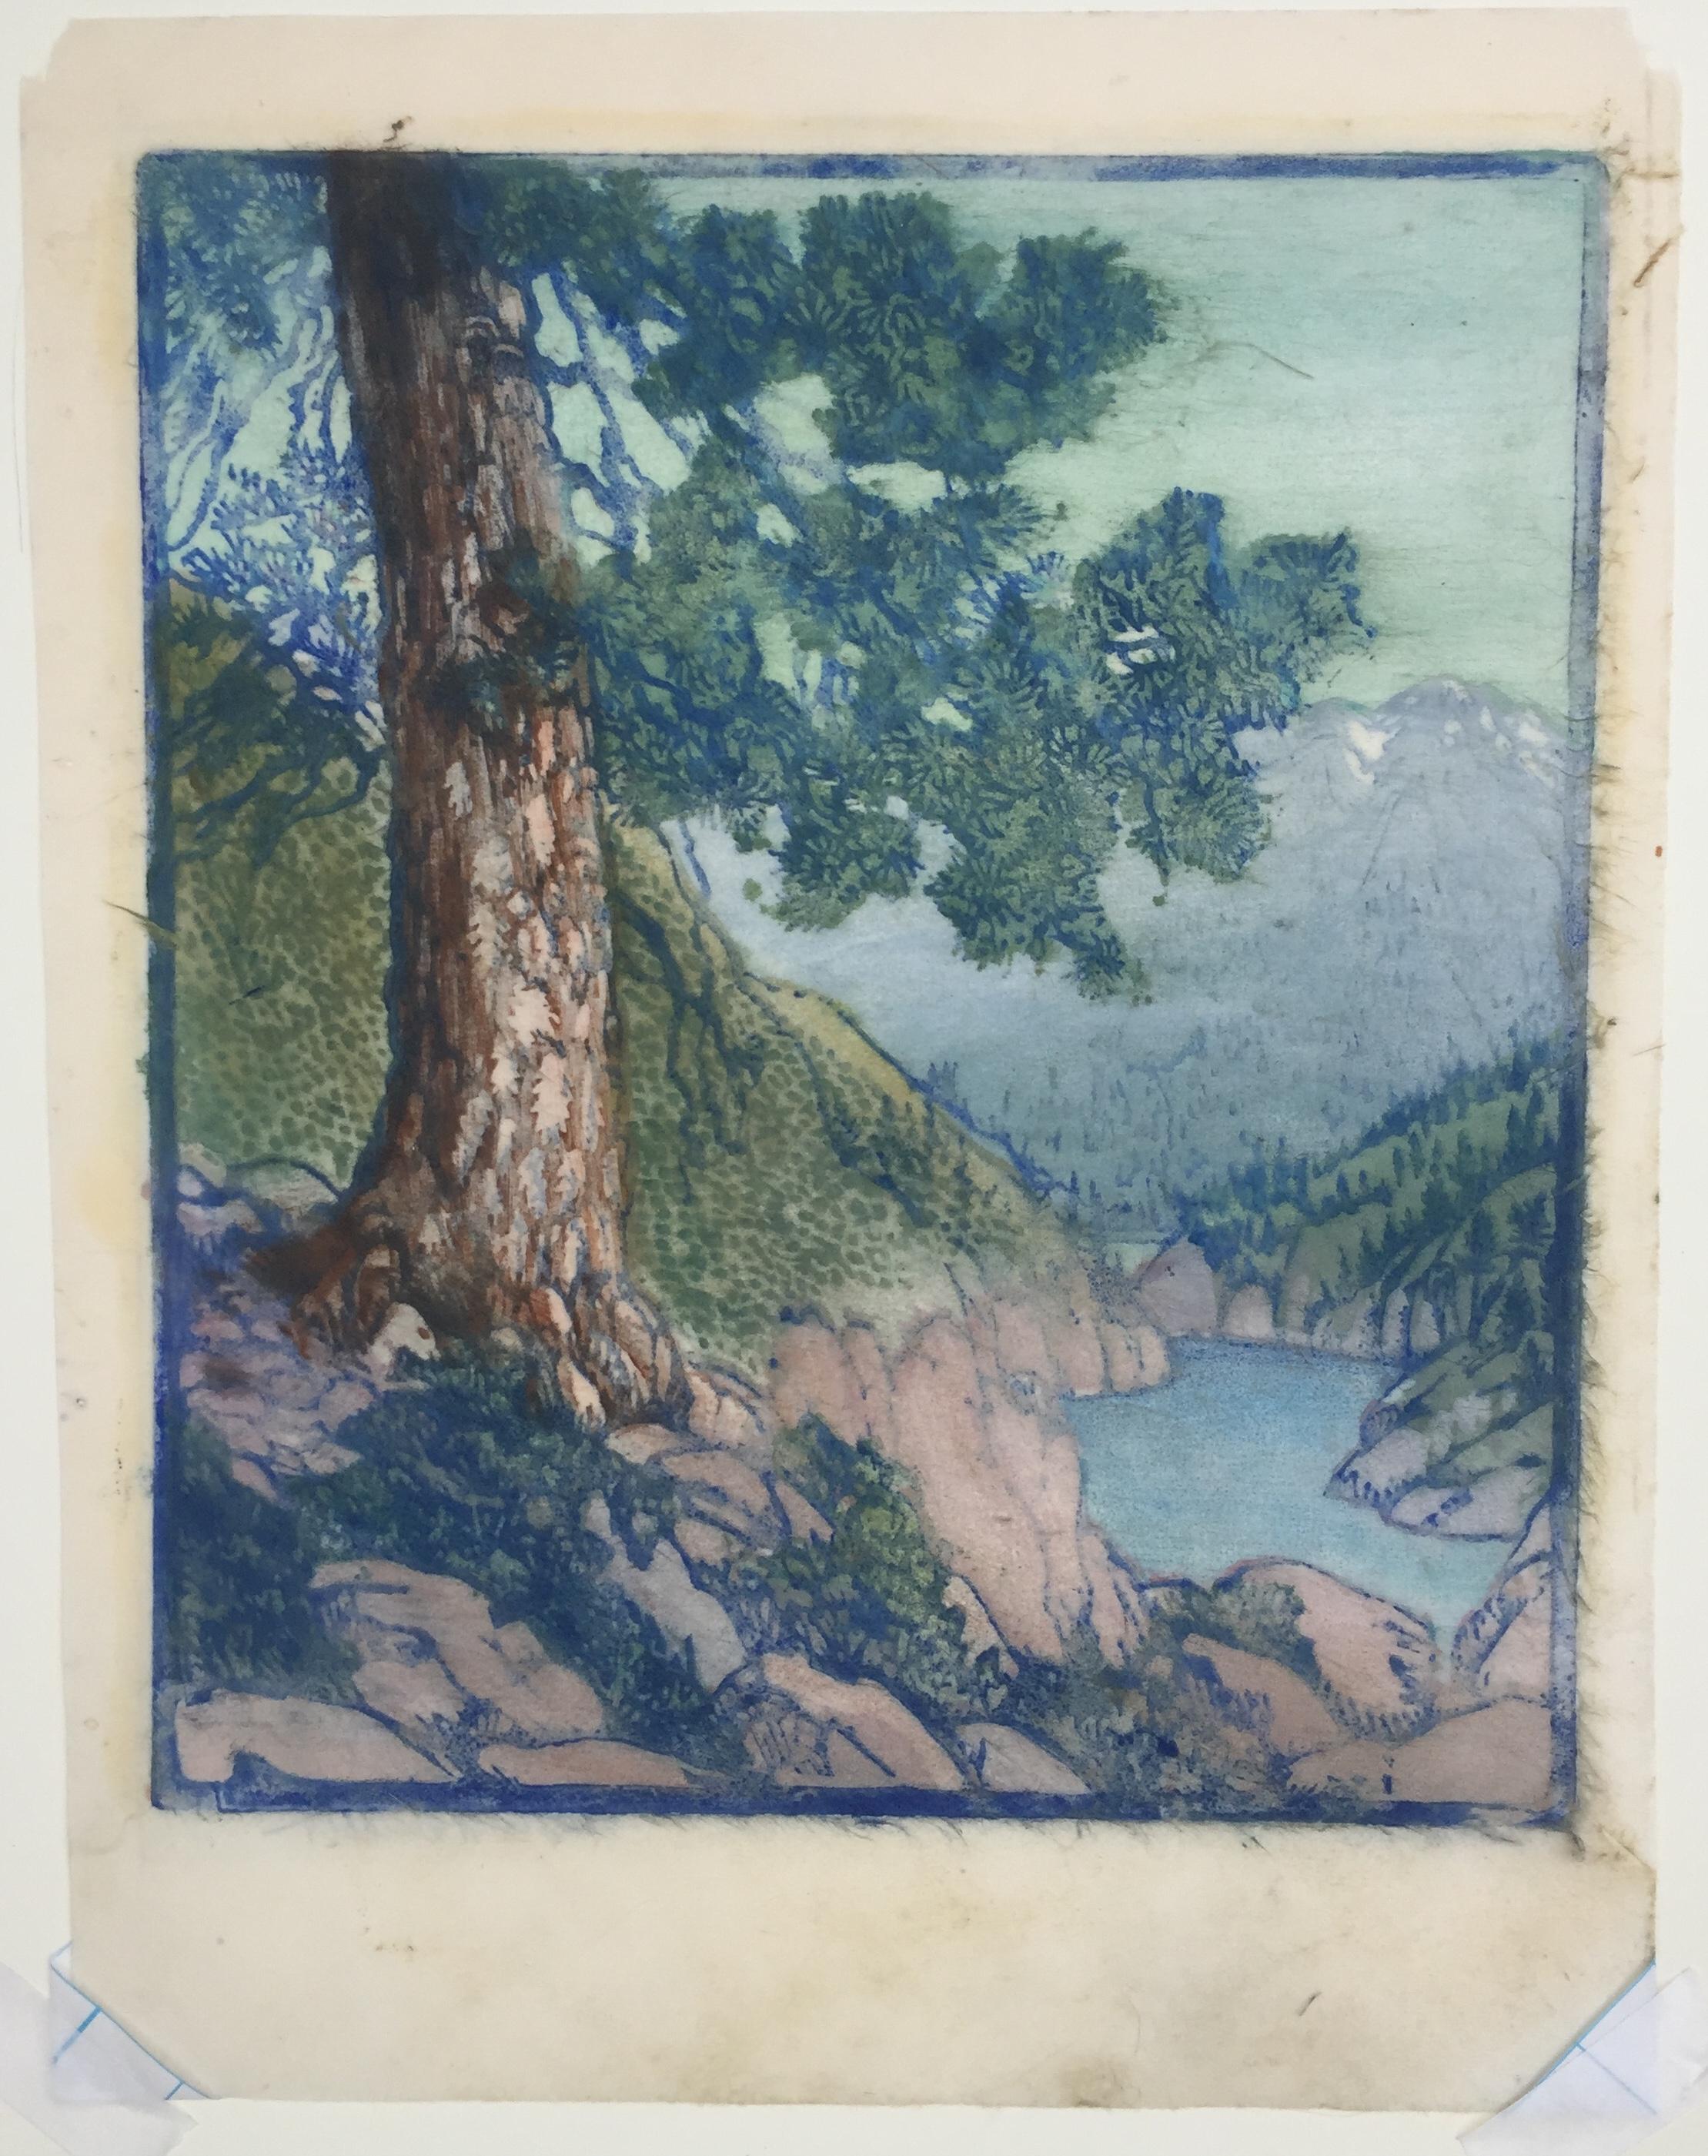 THE OLD PINE - Very Good Large Scale Work by a Master of the Color Block Print - Gray Landscape Print by Frances H. Gearhart